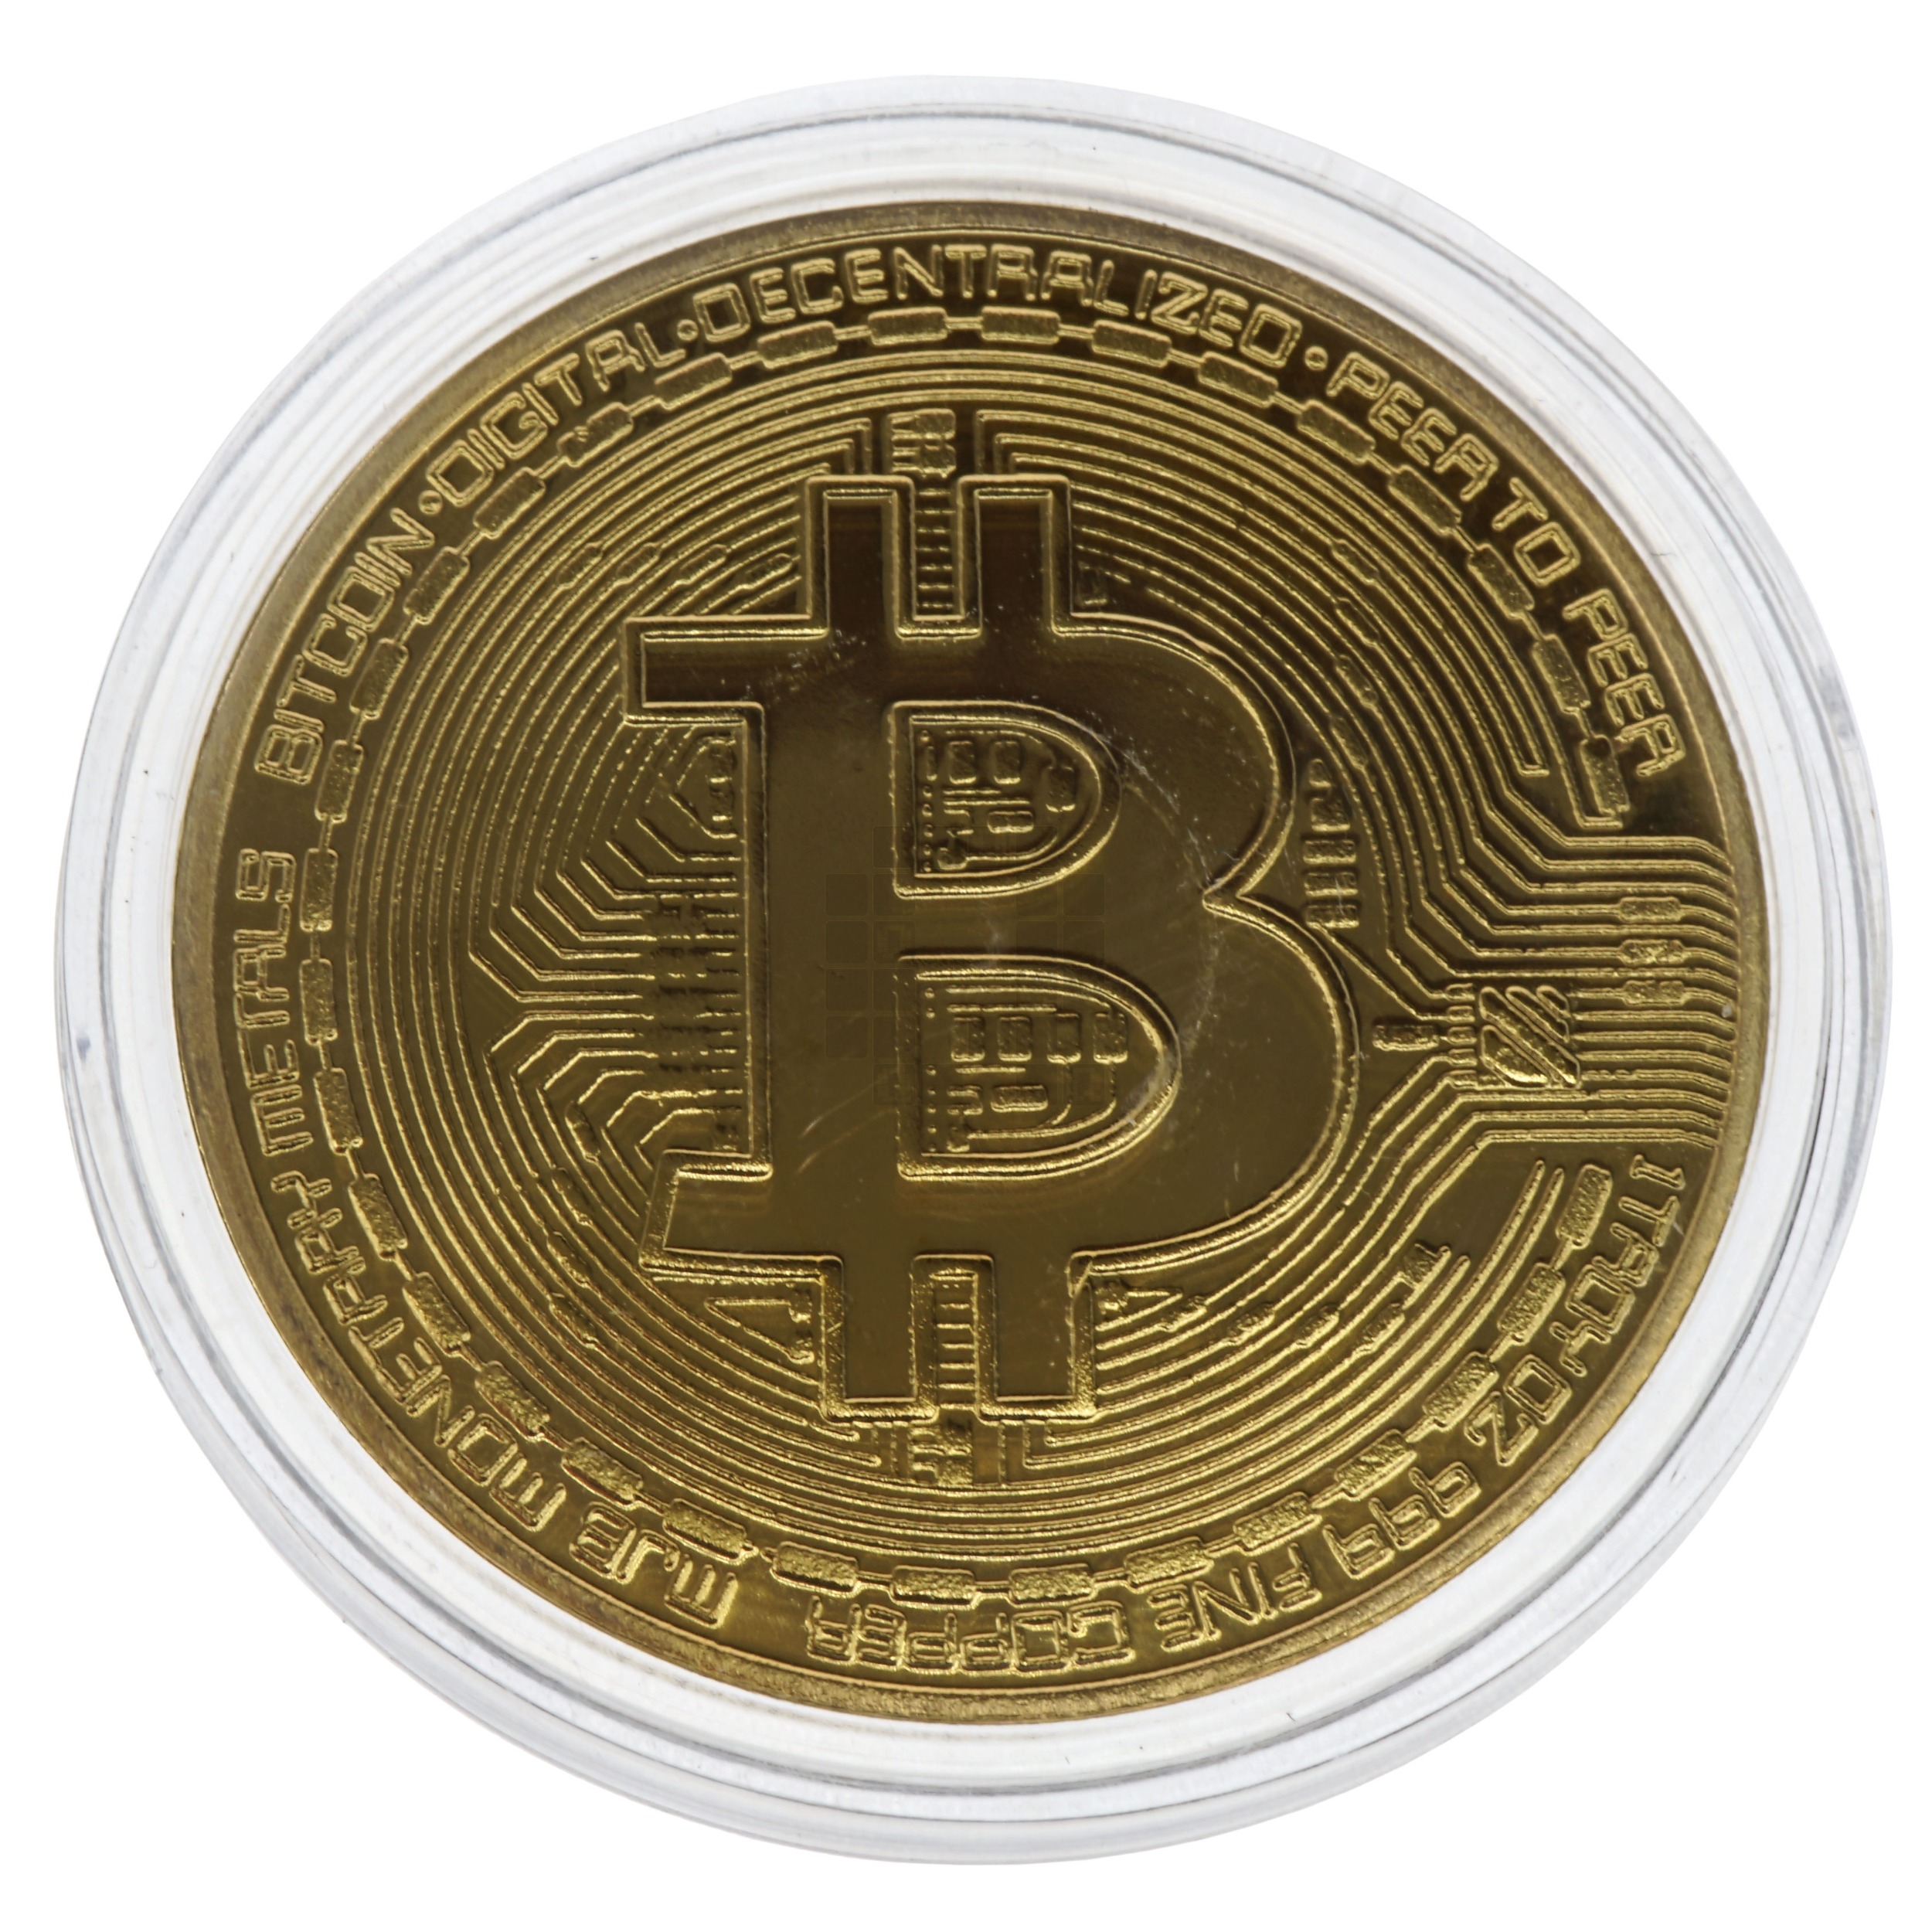 Gold Plated Collectible Bitcoin Coin in Protective Plastic Case